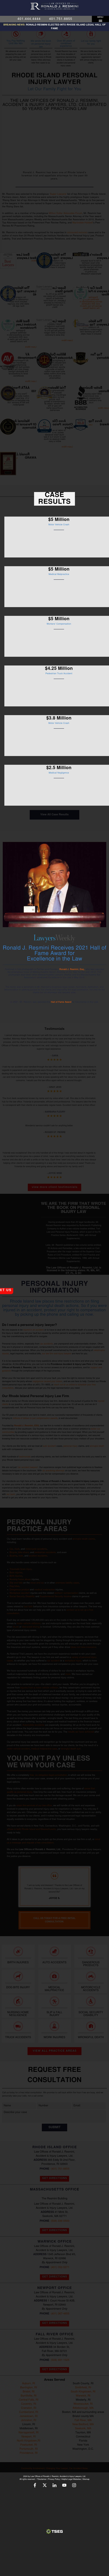 Law Offices of Ronald J. Resmini, Accident & Injury Lawyers, Ltd. - Providence RI Lawyers